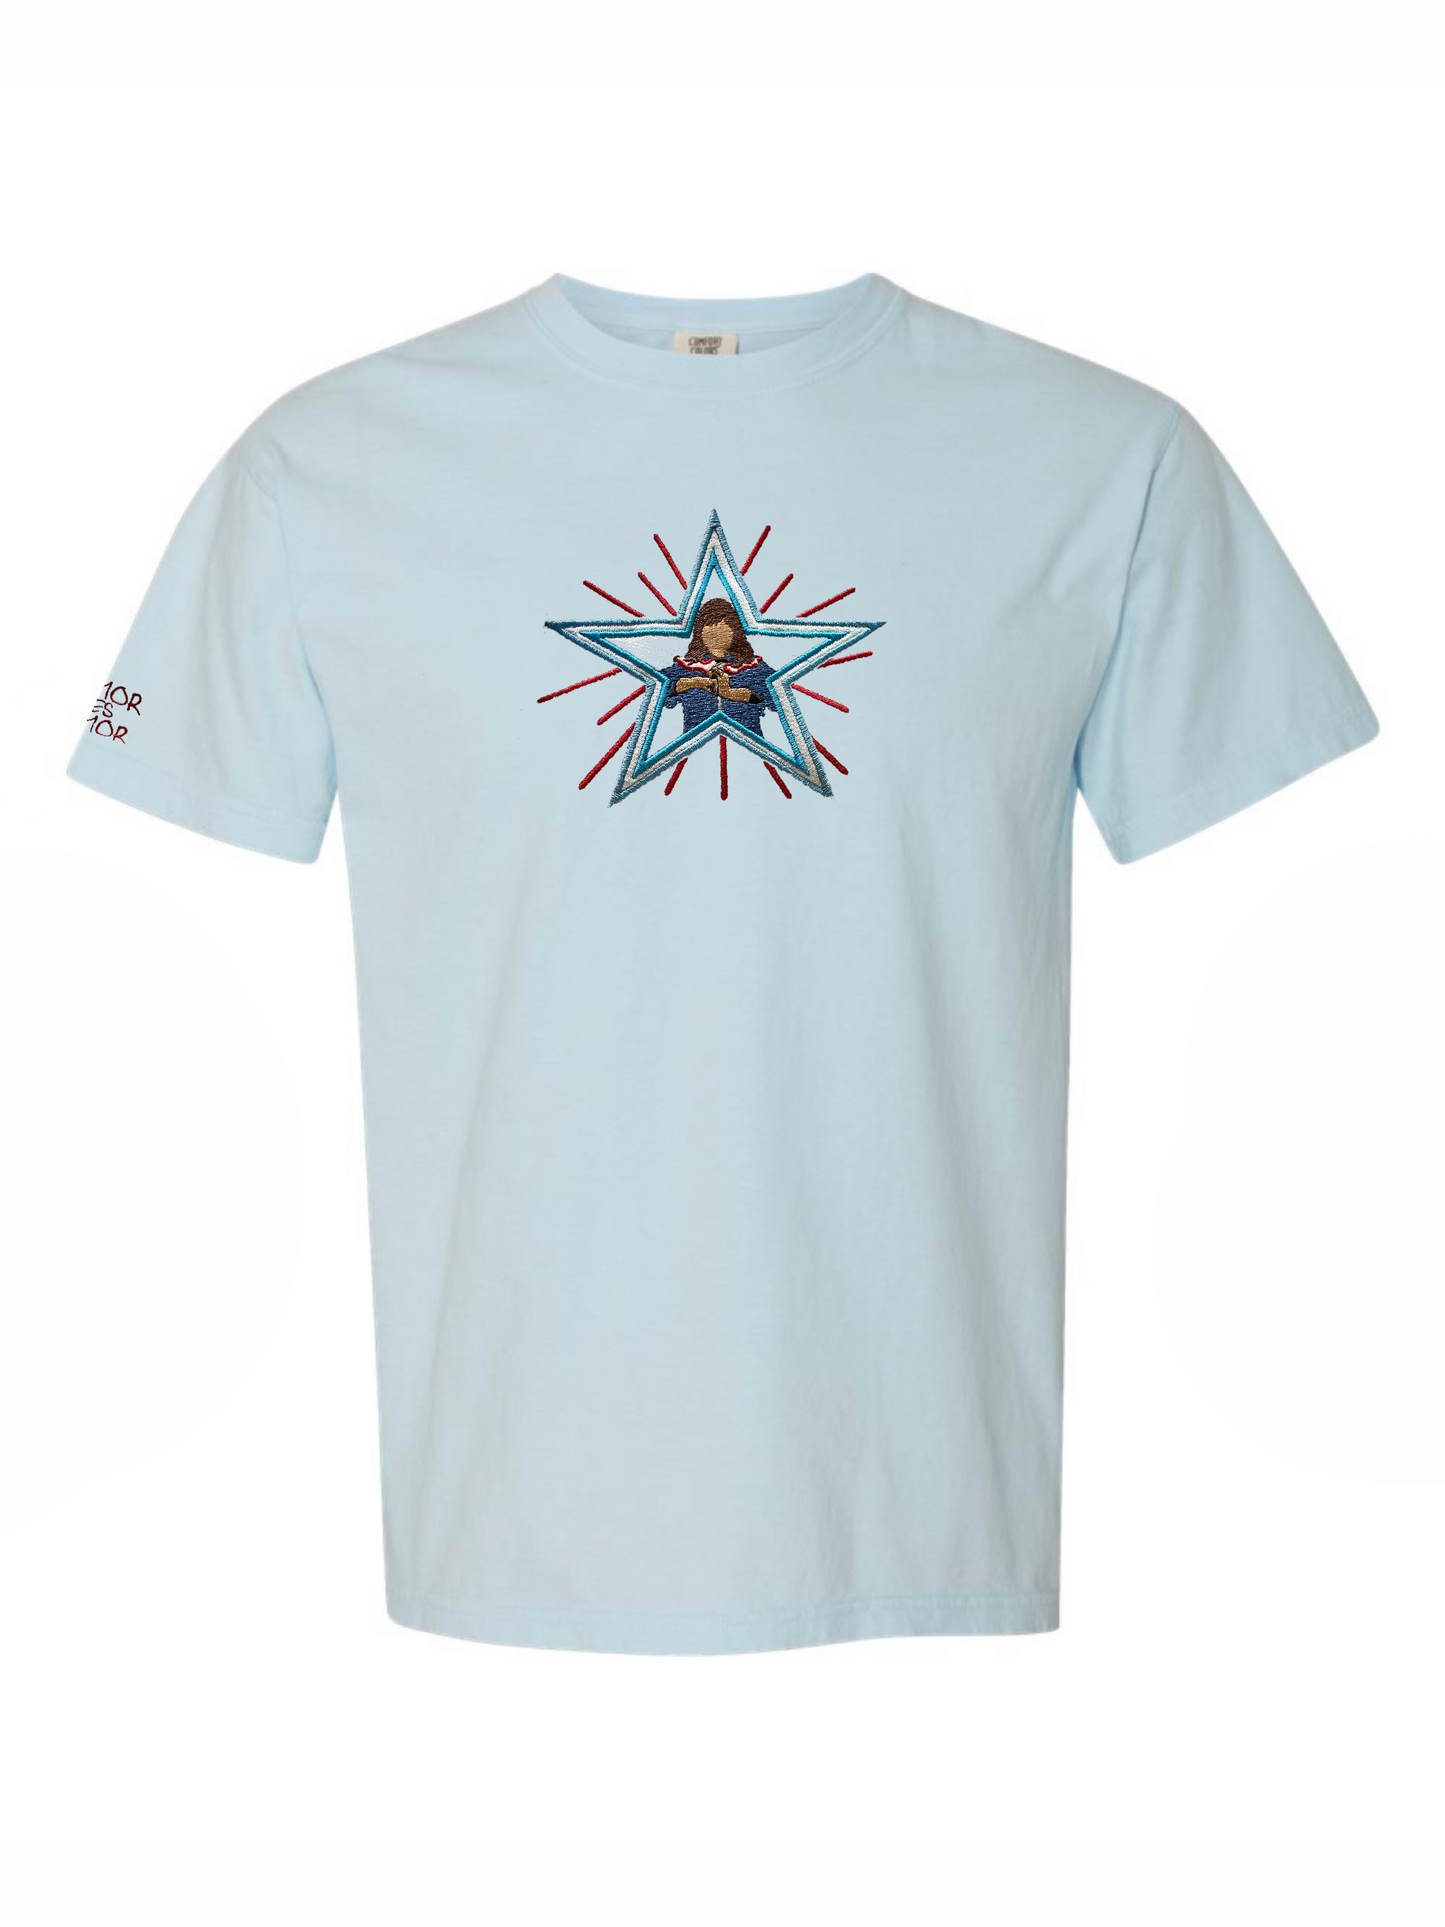 America embroidered T-SHIRT